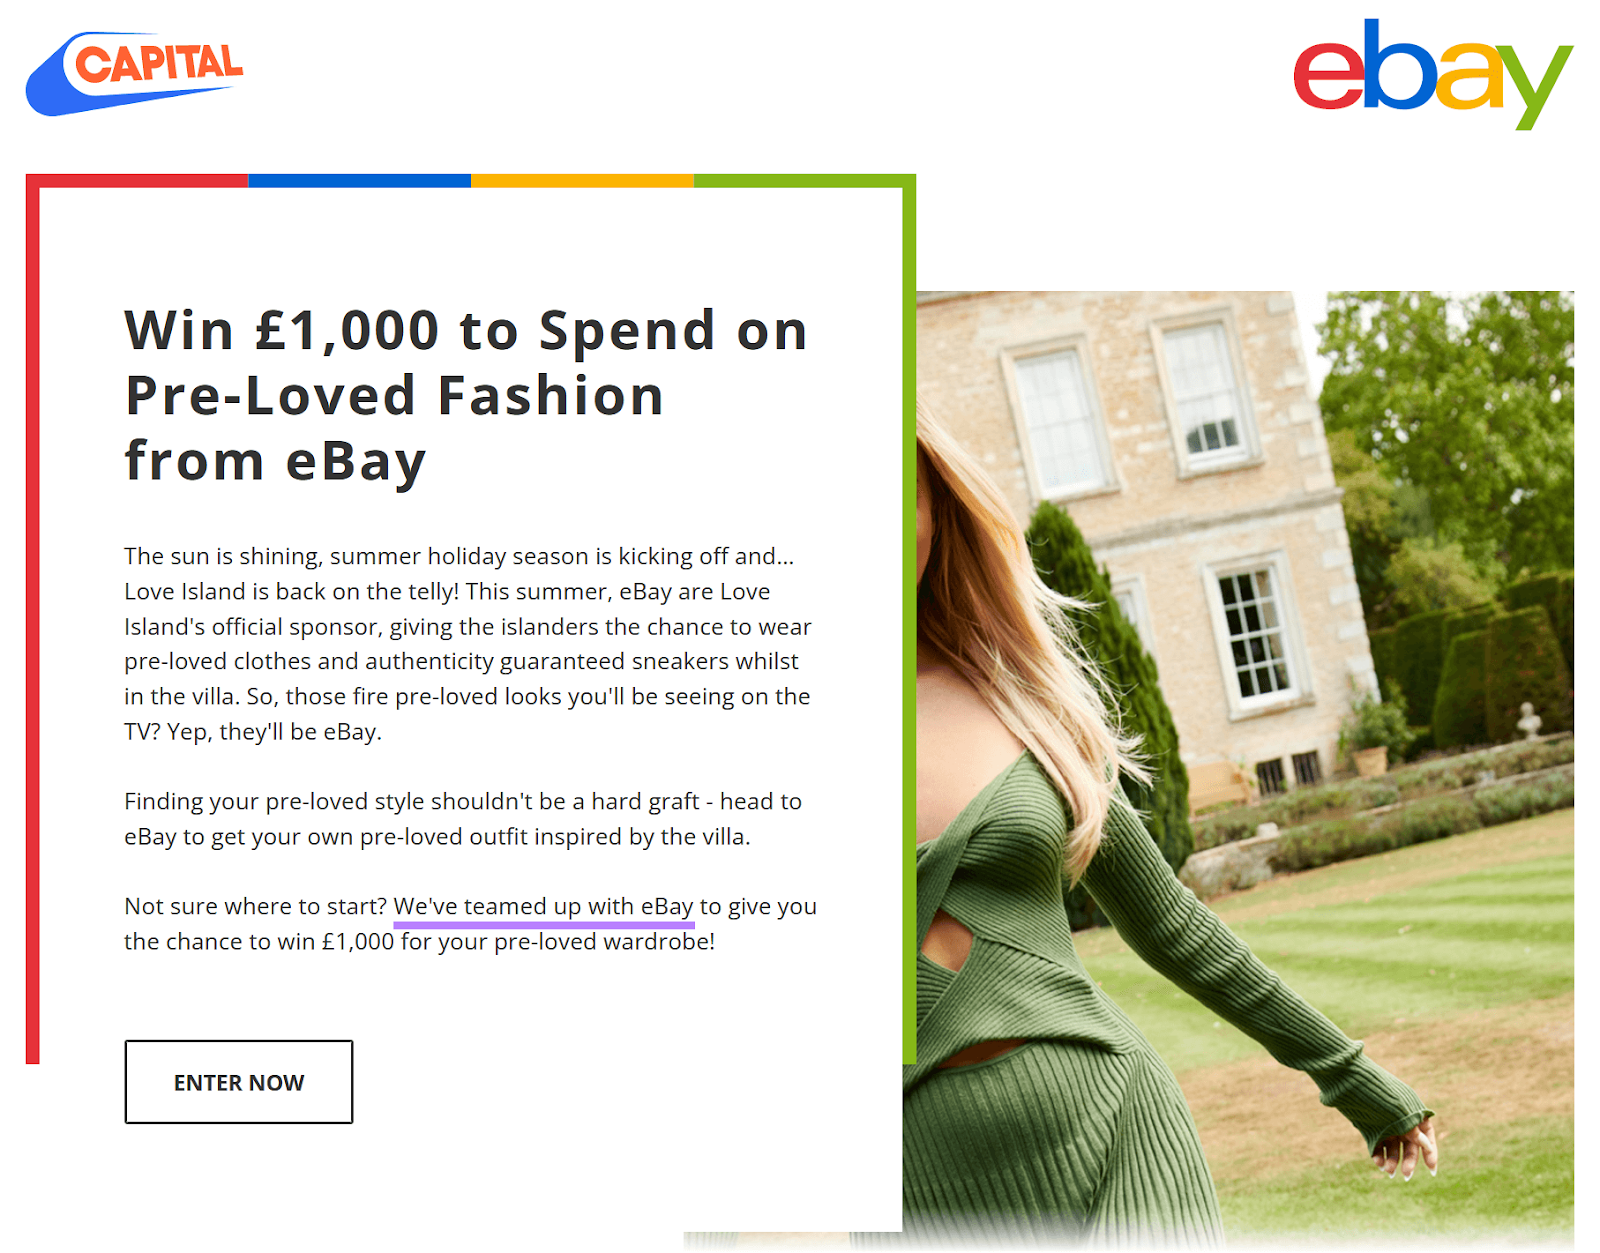 Capital FM hosted a competition for Ebay: